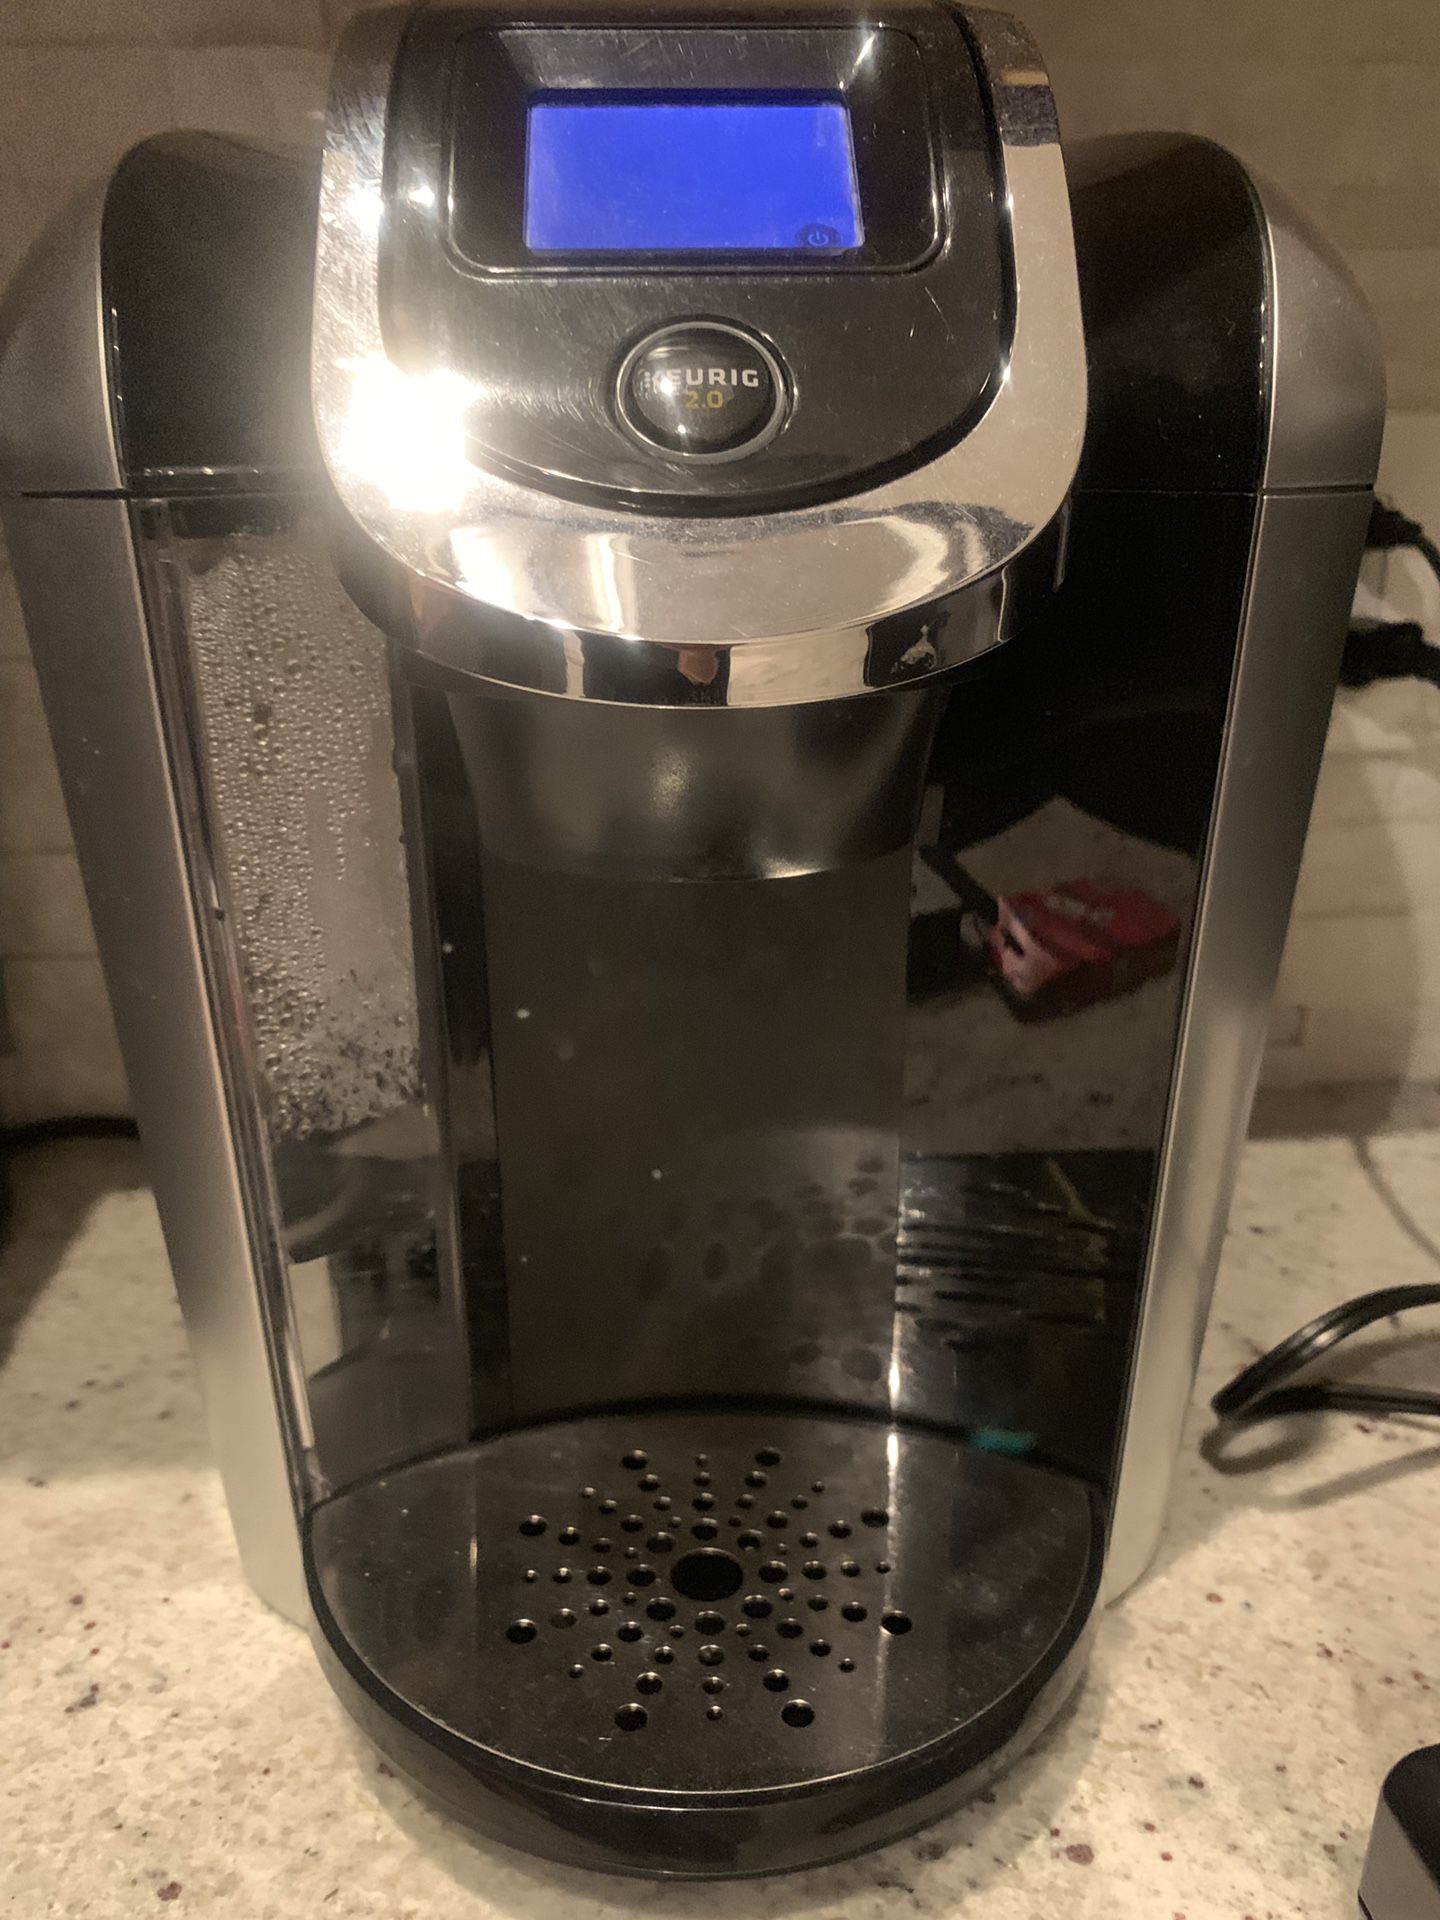 Coffee maker great condition no issues not rarely used